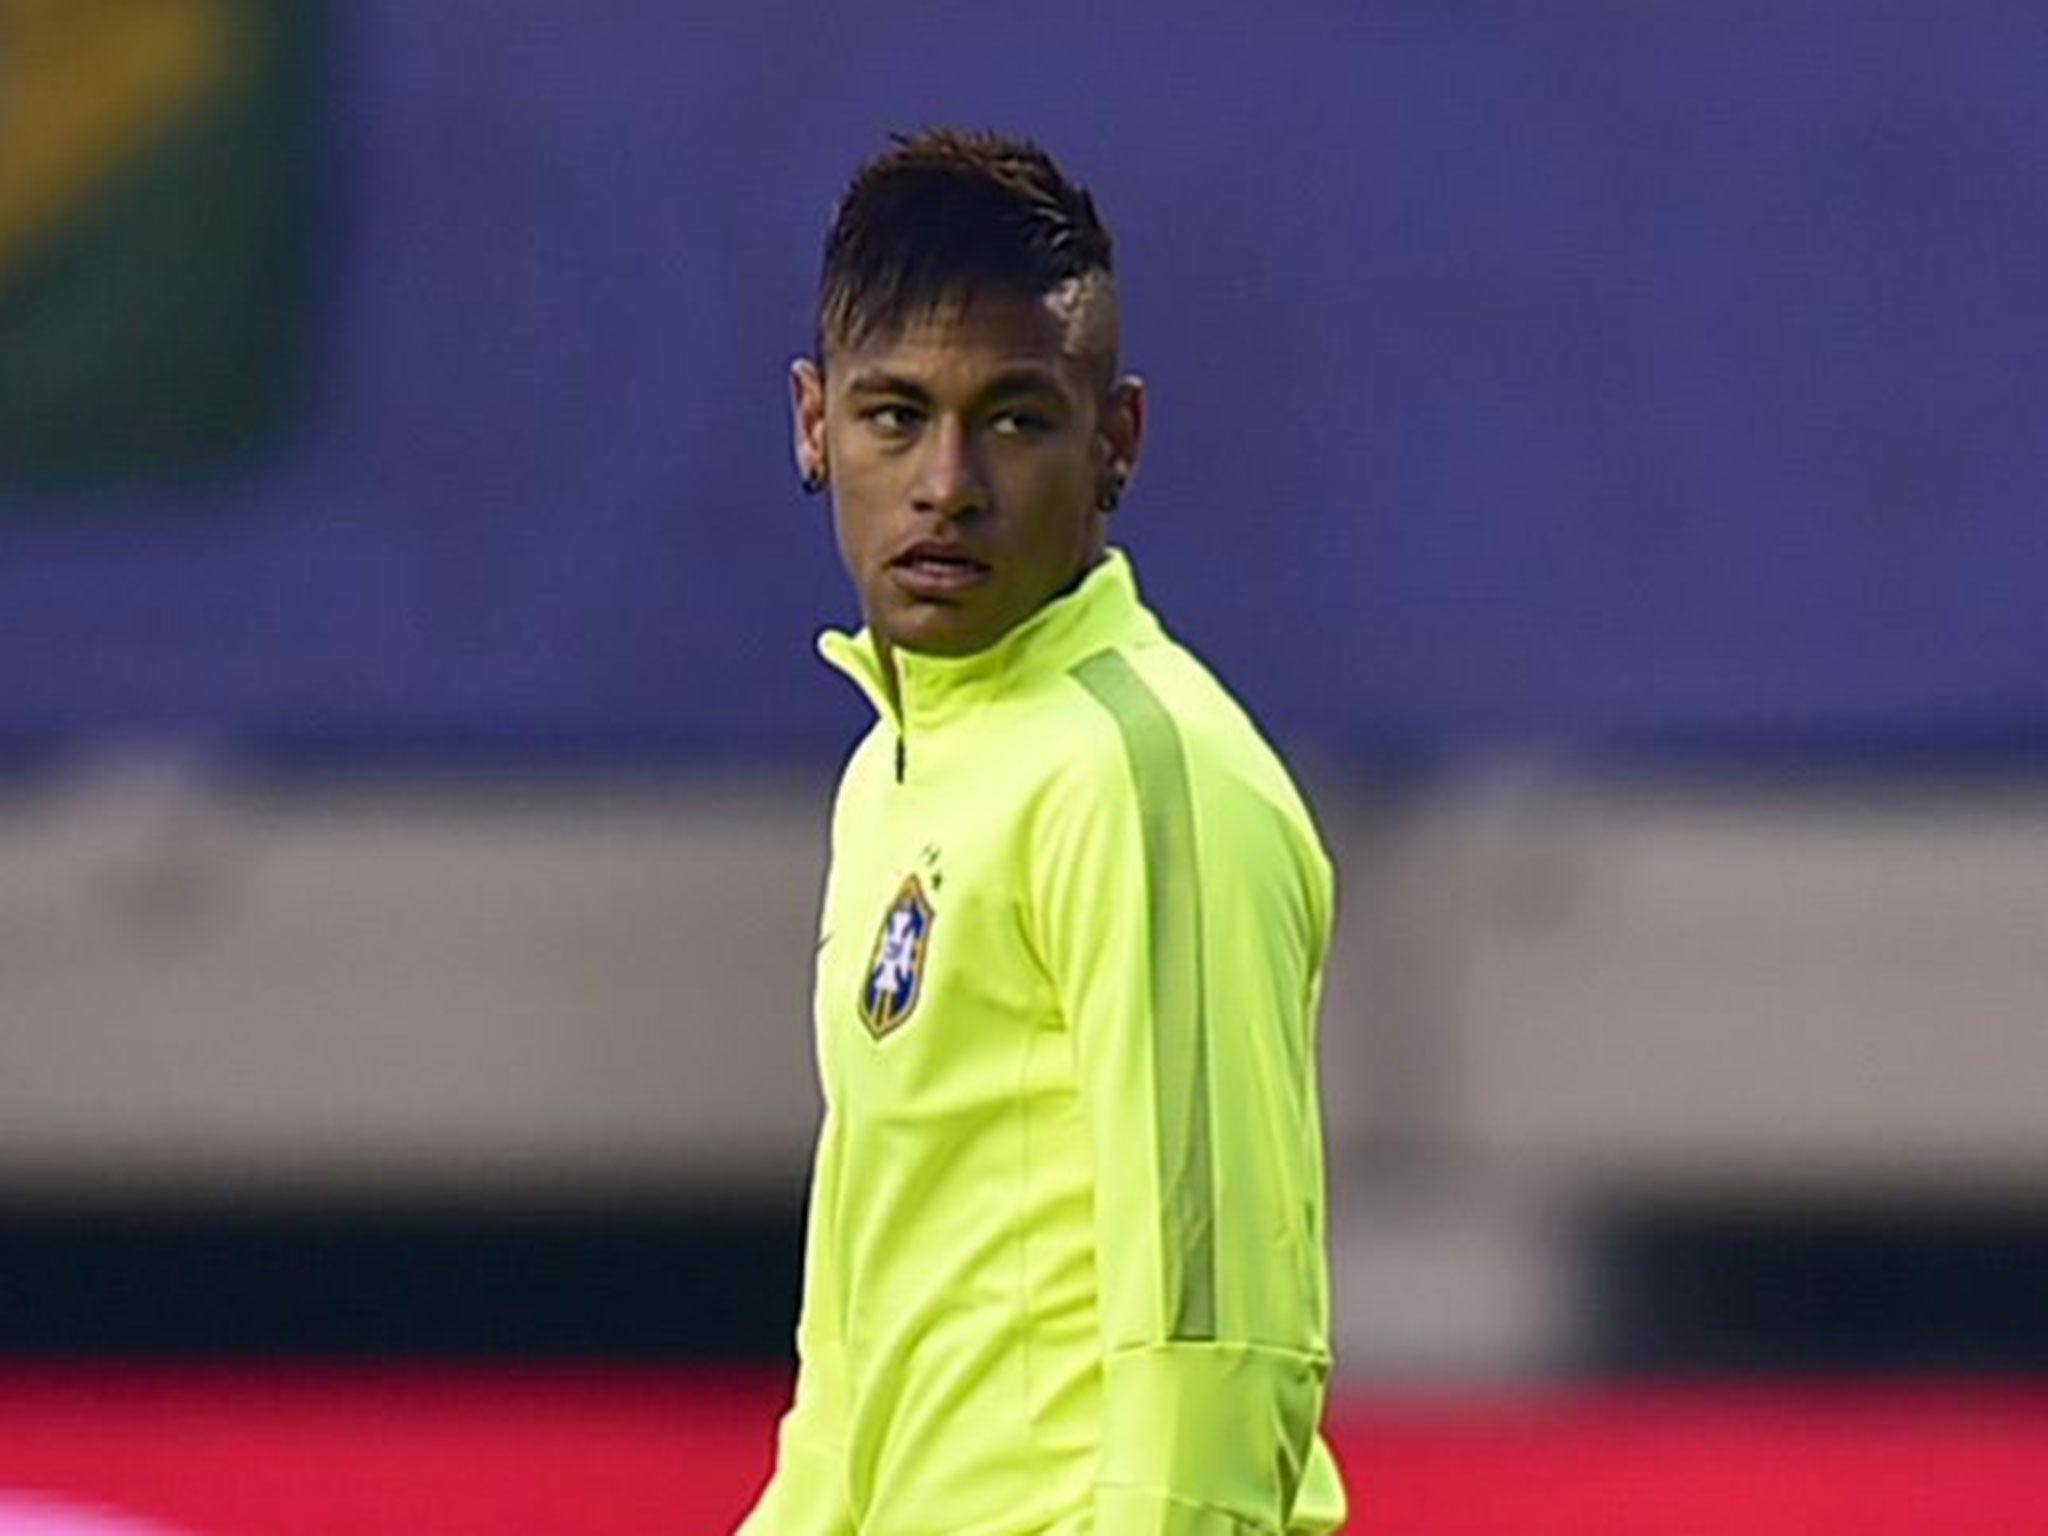 Neymar's Barcelona transfer is being investigated